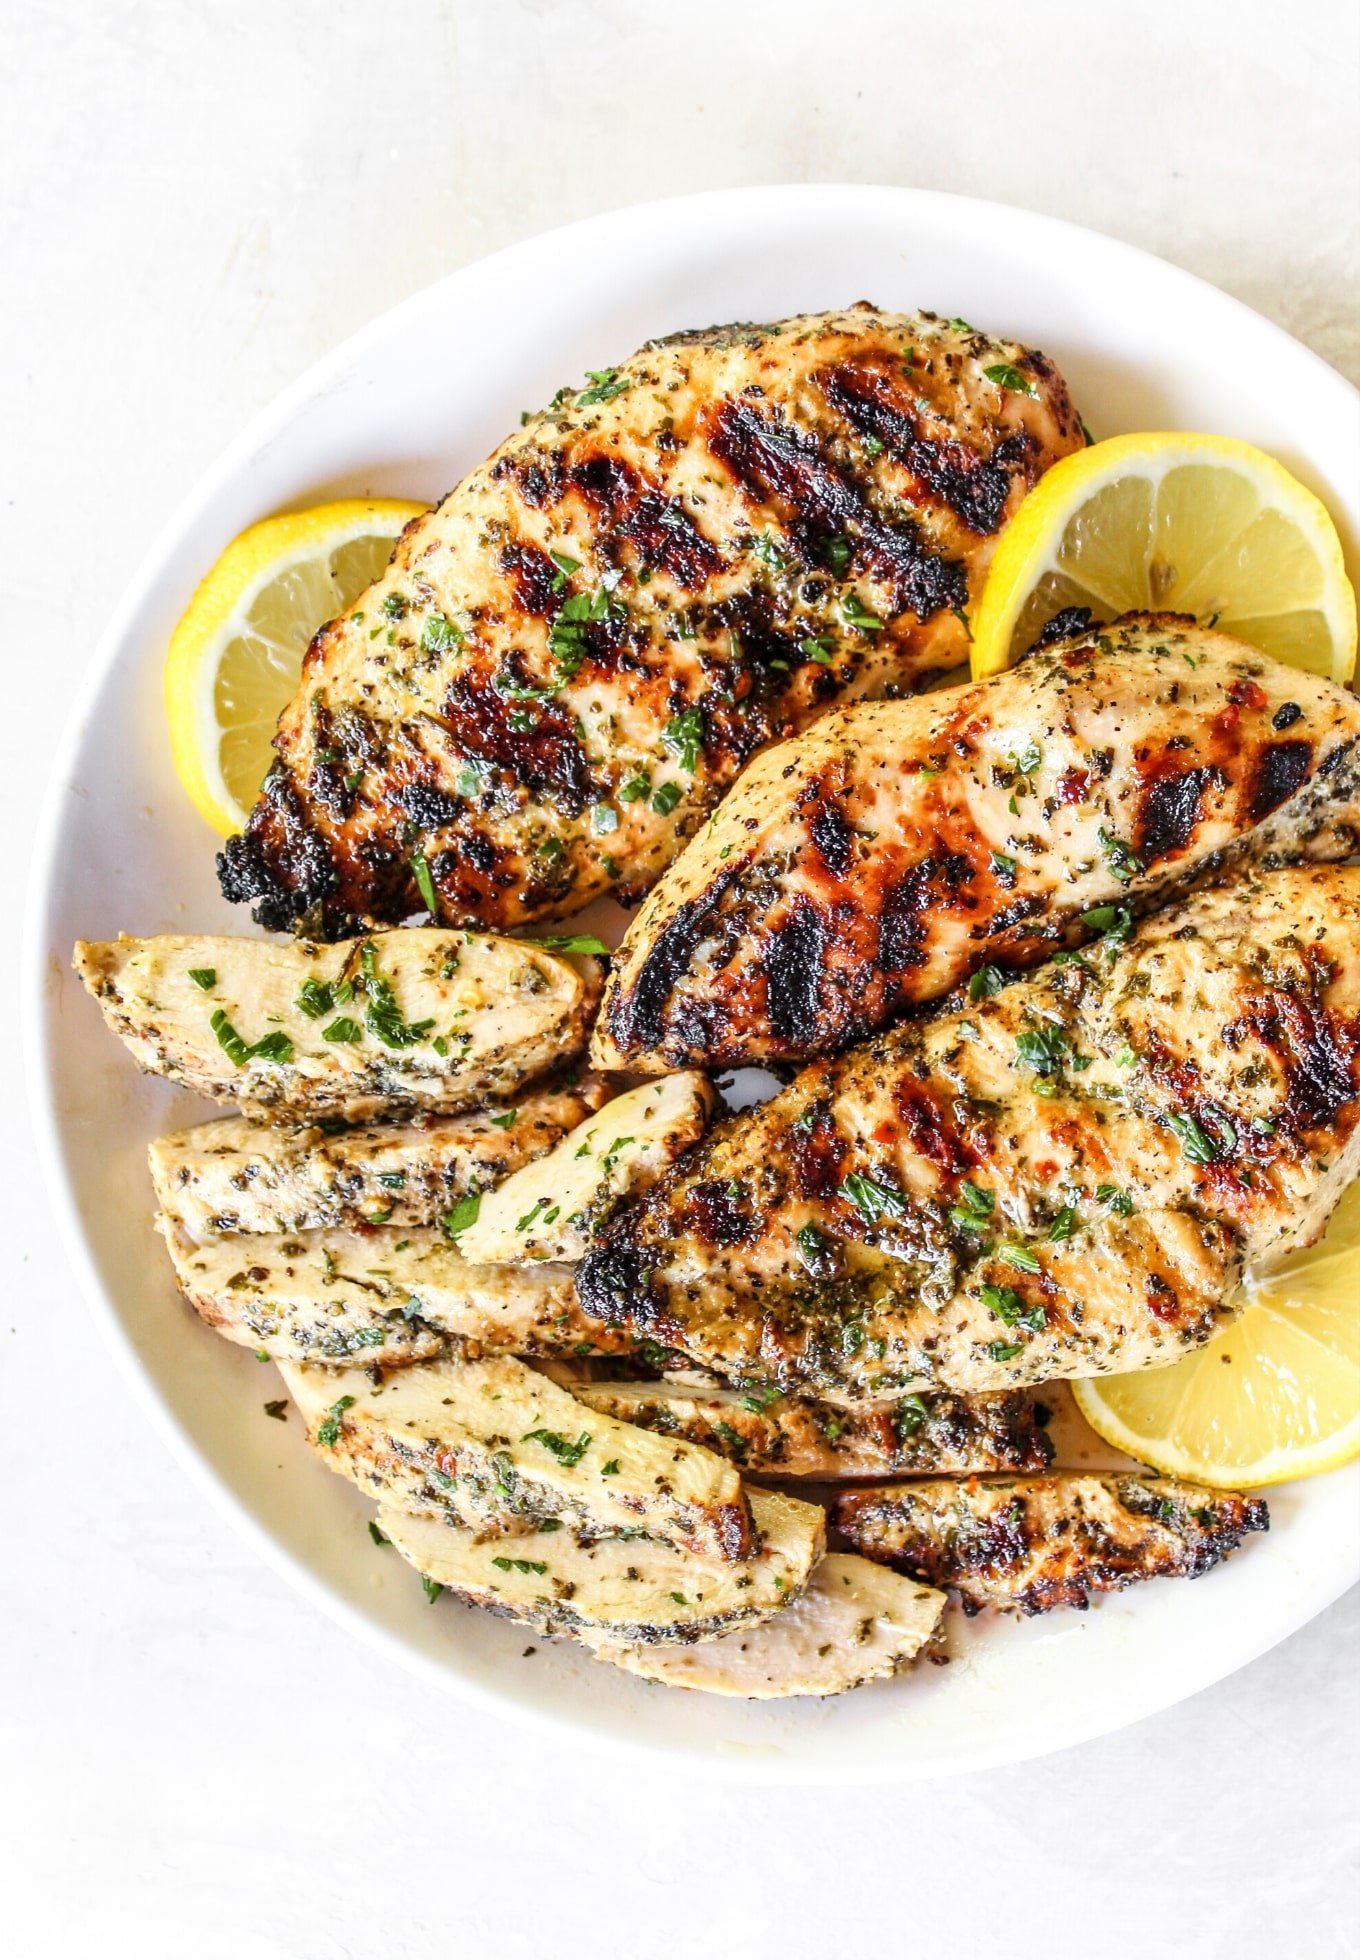 Delicious Lemon and Herb Seasoning - Add Flavor to Your Dishes